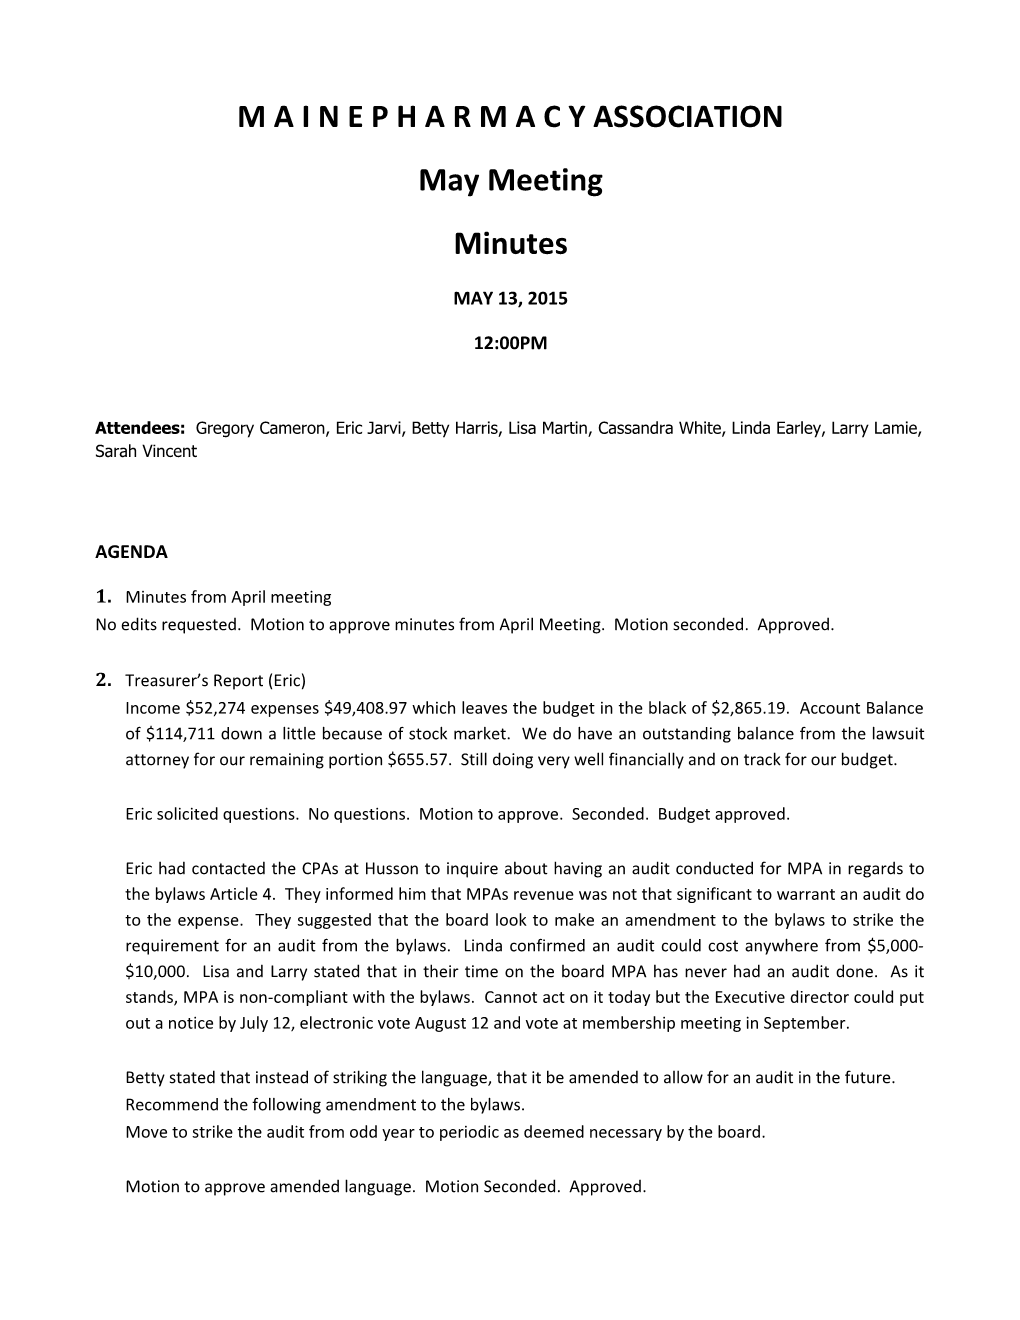 No Edits Requested. Motion to Approve Minutes from April Meeting. Motion Seconded. Approved